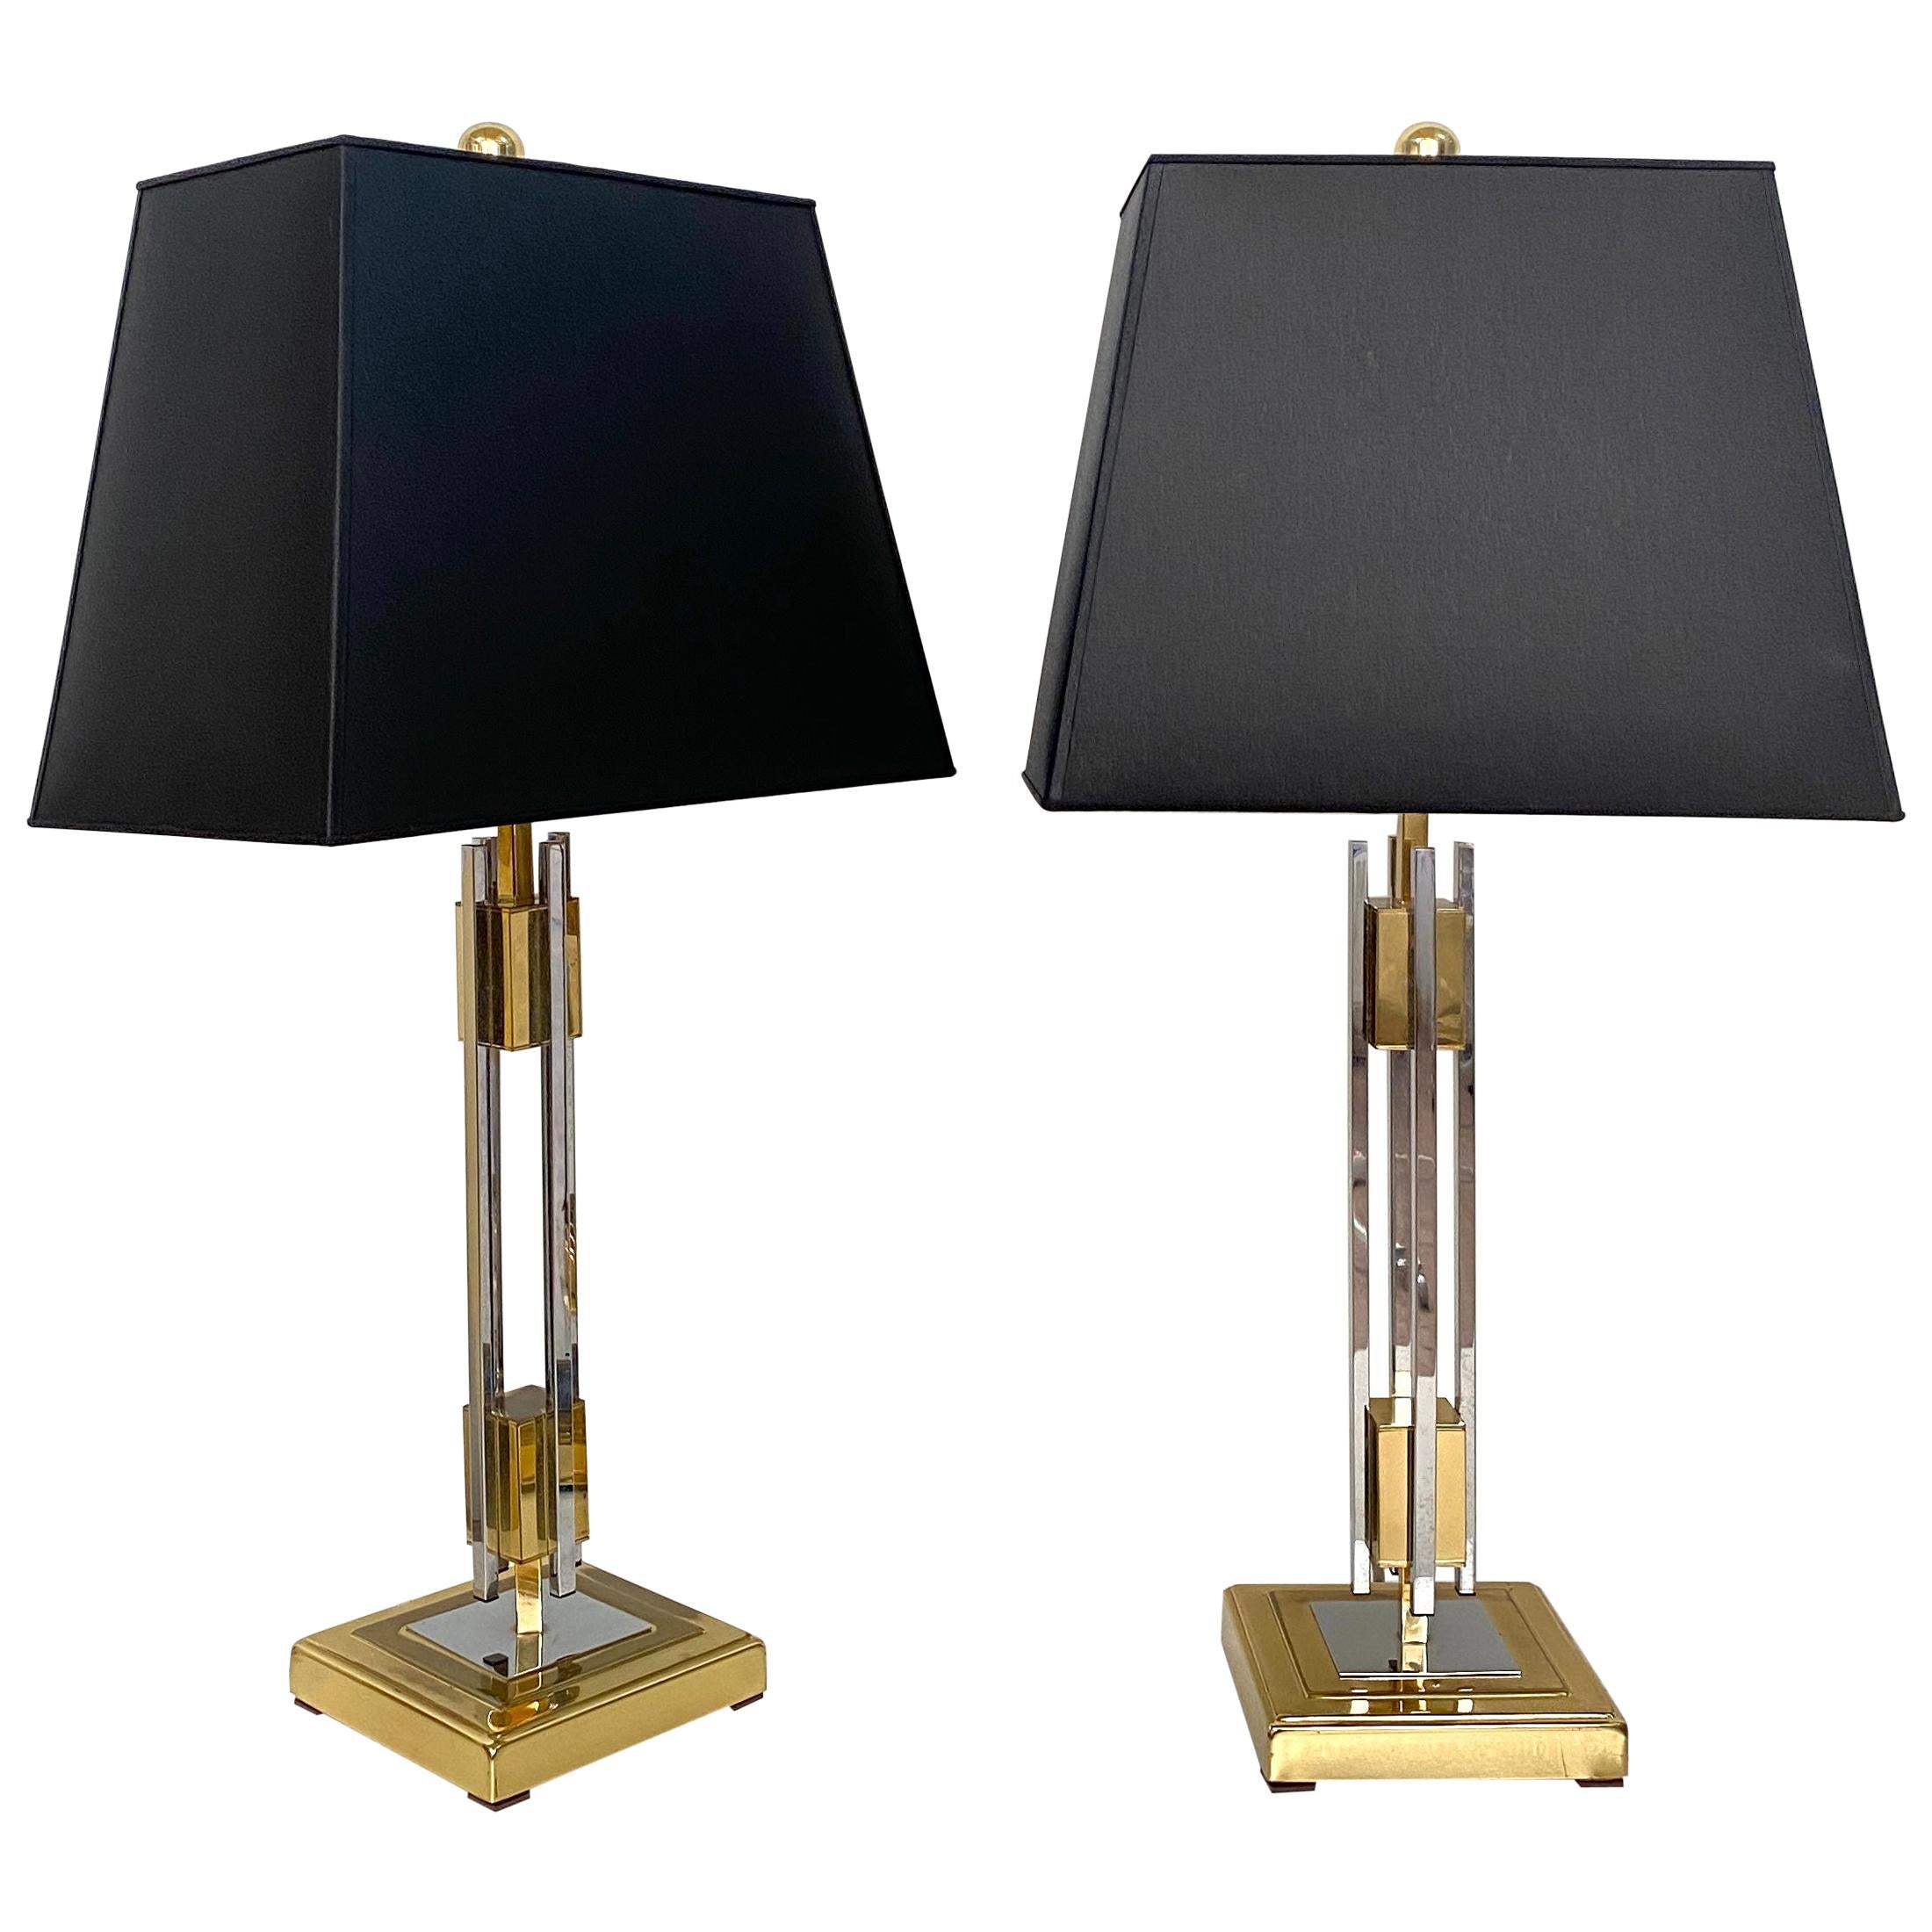 Pair of Midcentury Gold and Chrome Table Lamps by Willy Rizzo, circa 1970